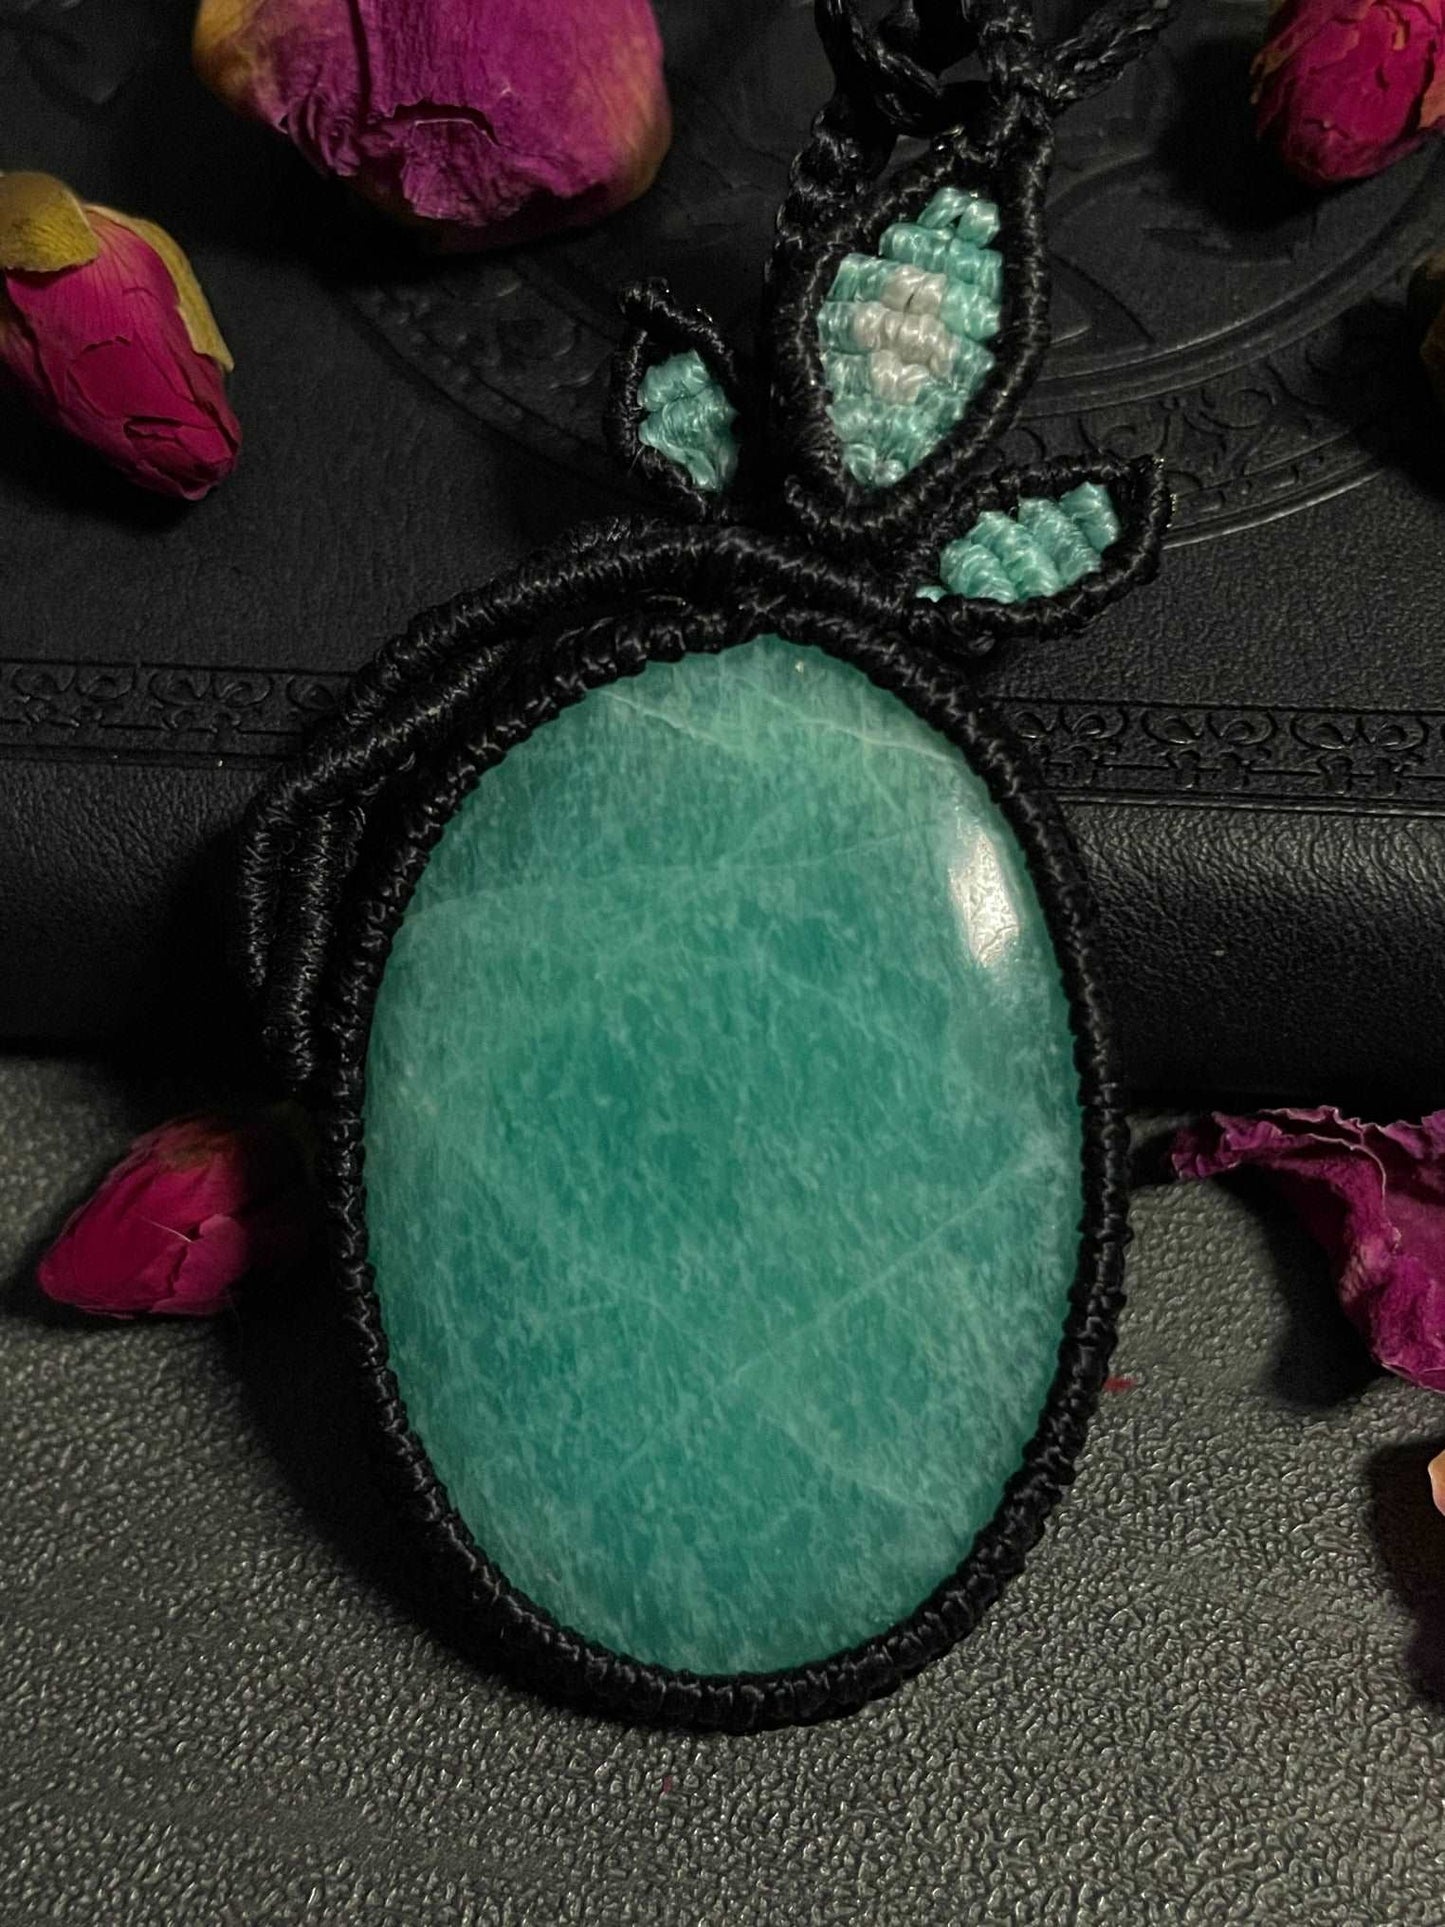 Pictured is an amazonite cabochon wrapped in macrame thread. A gothic book and flowers are nearby. Amazonite Macramé Necklace (Twisted Nightshade Jewellery) - The Wandering Fox Emporium, Your Crystal Store